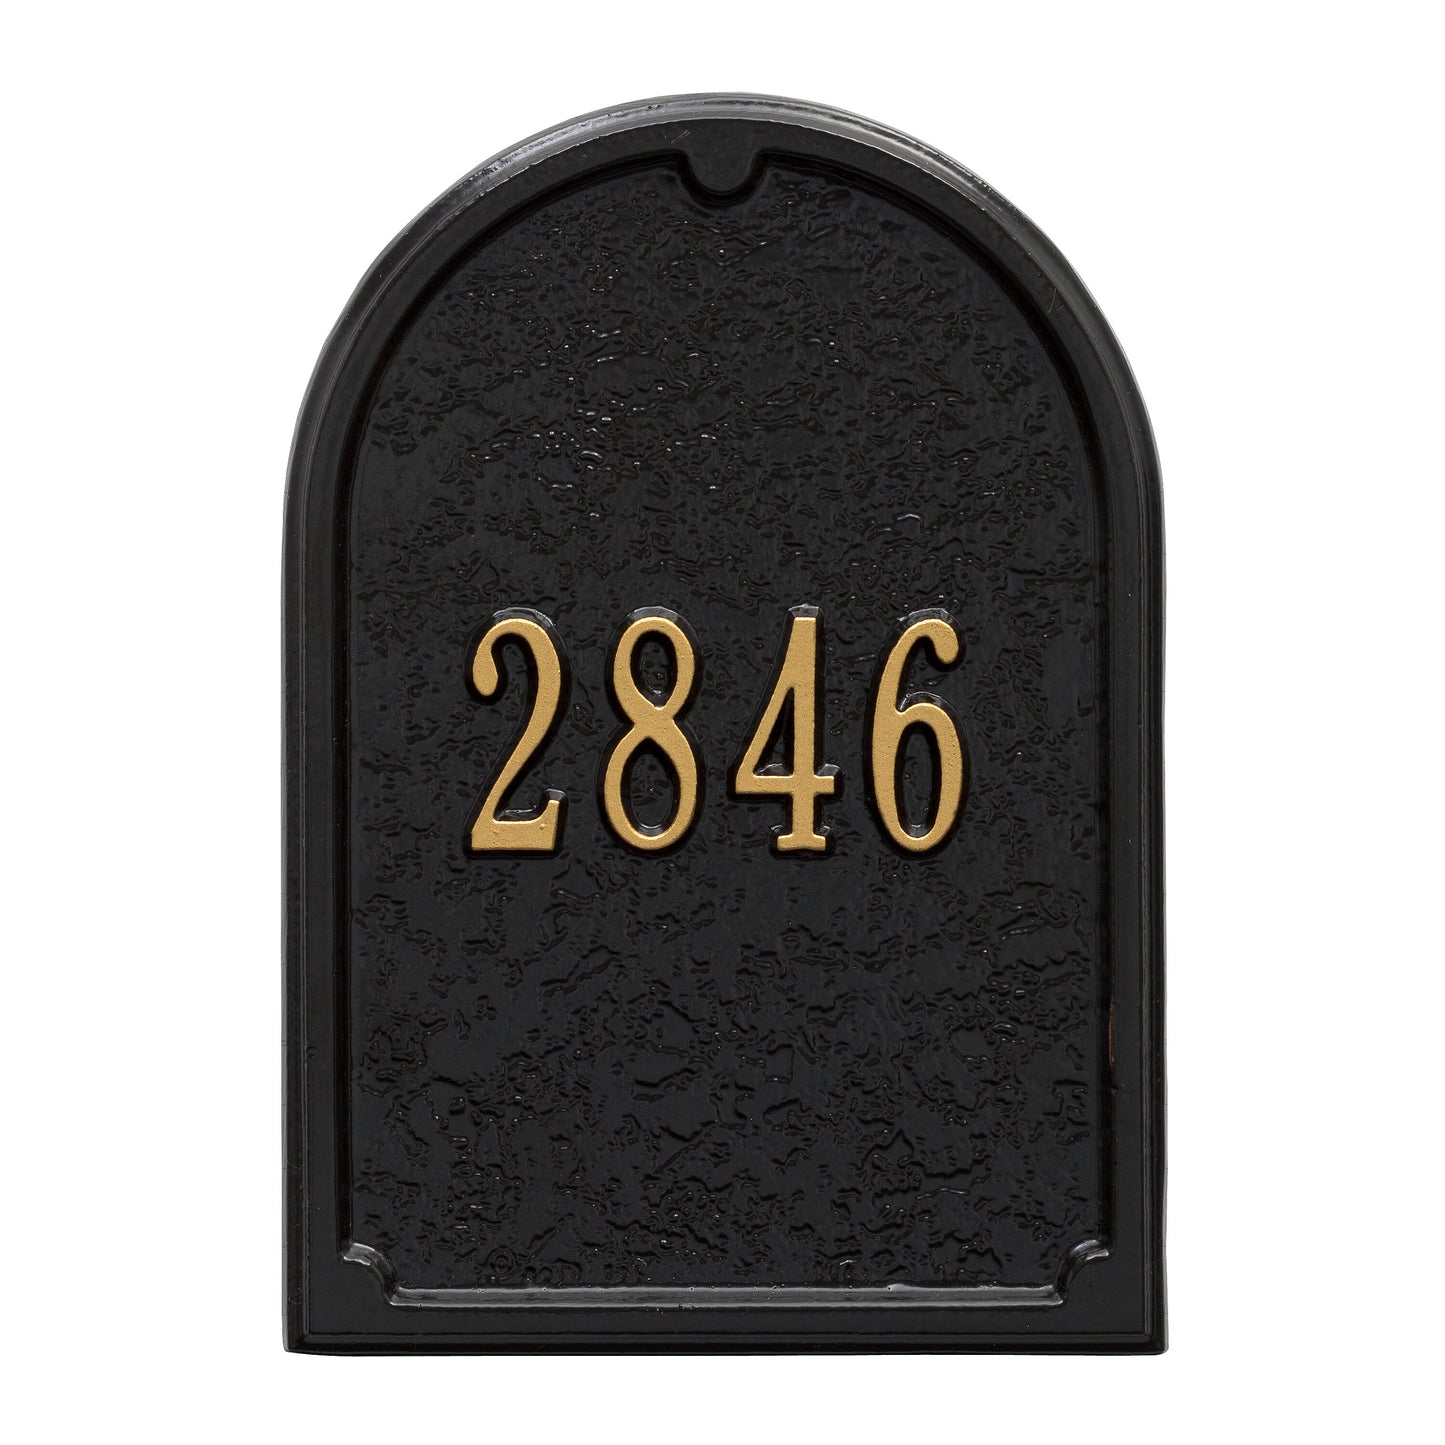 Whitehall Products Personalized Mailbox Door Personalized Door Plaque Black/silver